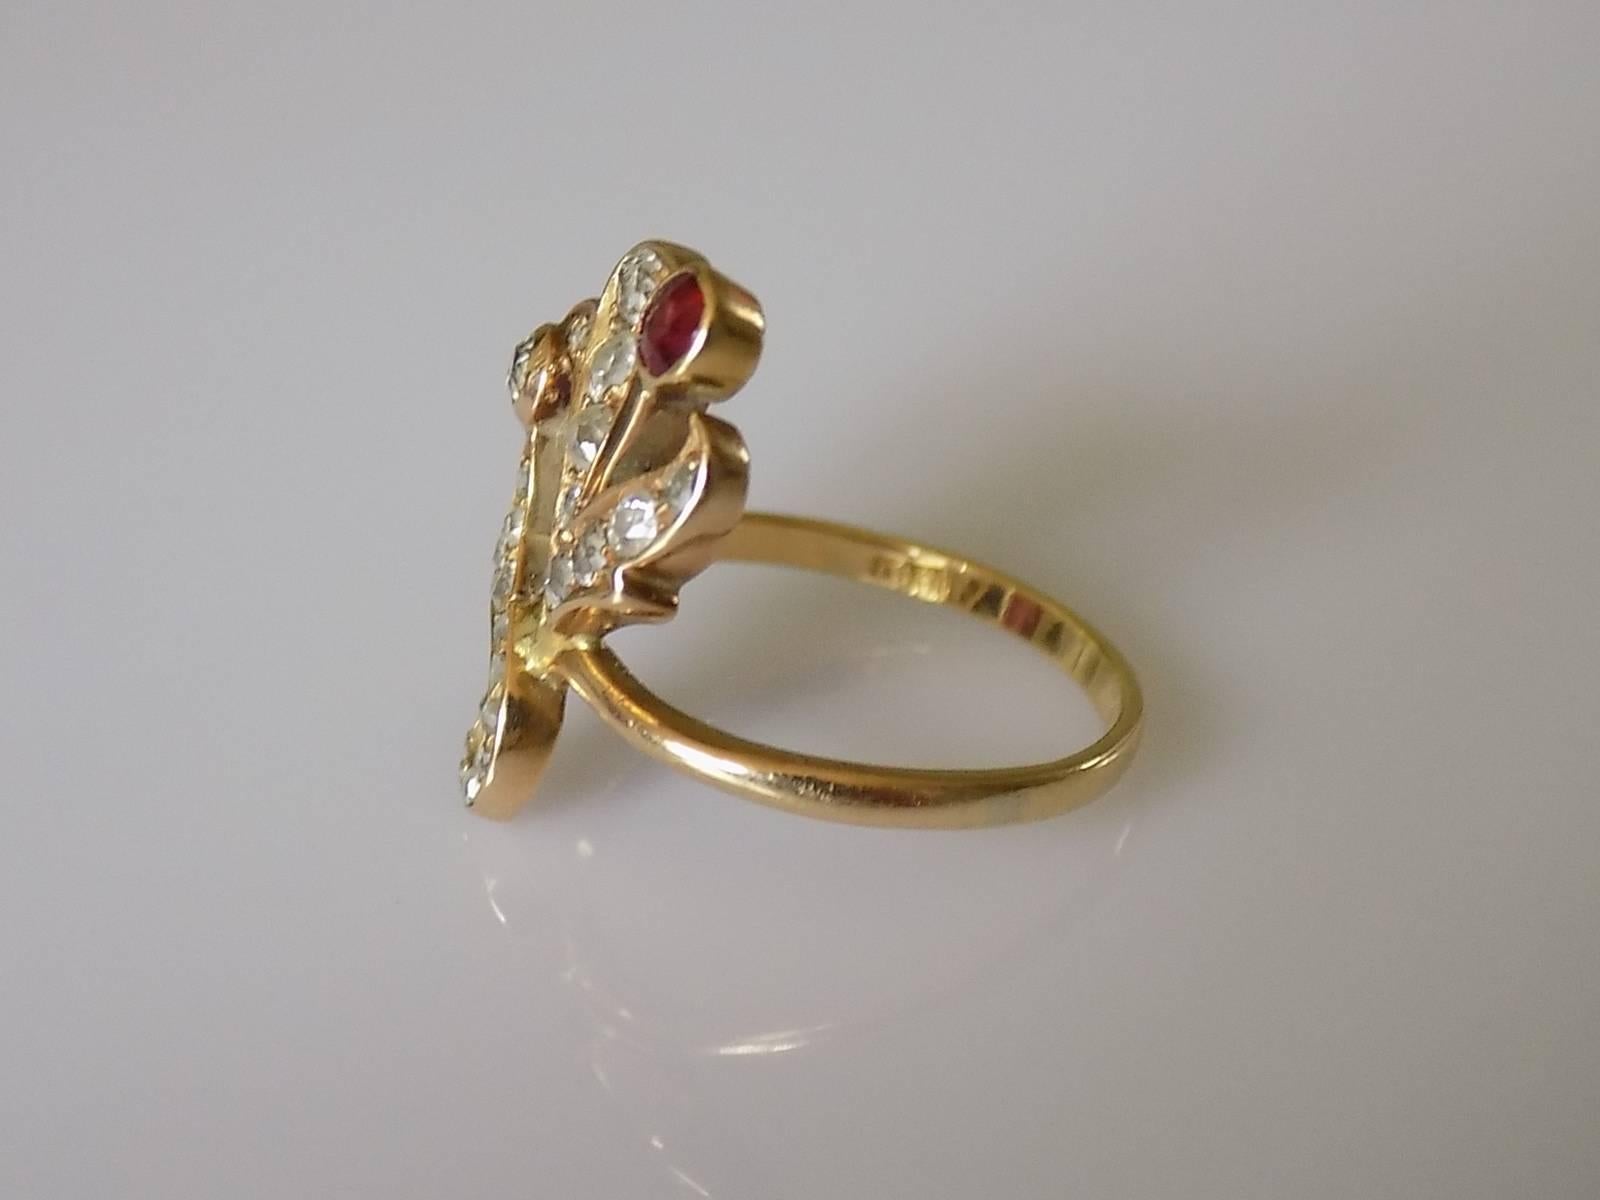 A Gorgeous Art Nouveau c.1890 18 Carat Yellow Gold, Old cut Diamond and Garnet ring. The ring outstanding quality and made in traditional Art Nouveau style with a very soft organic lines in the shape of a flower and leaves. Unique and extremely